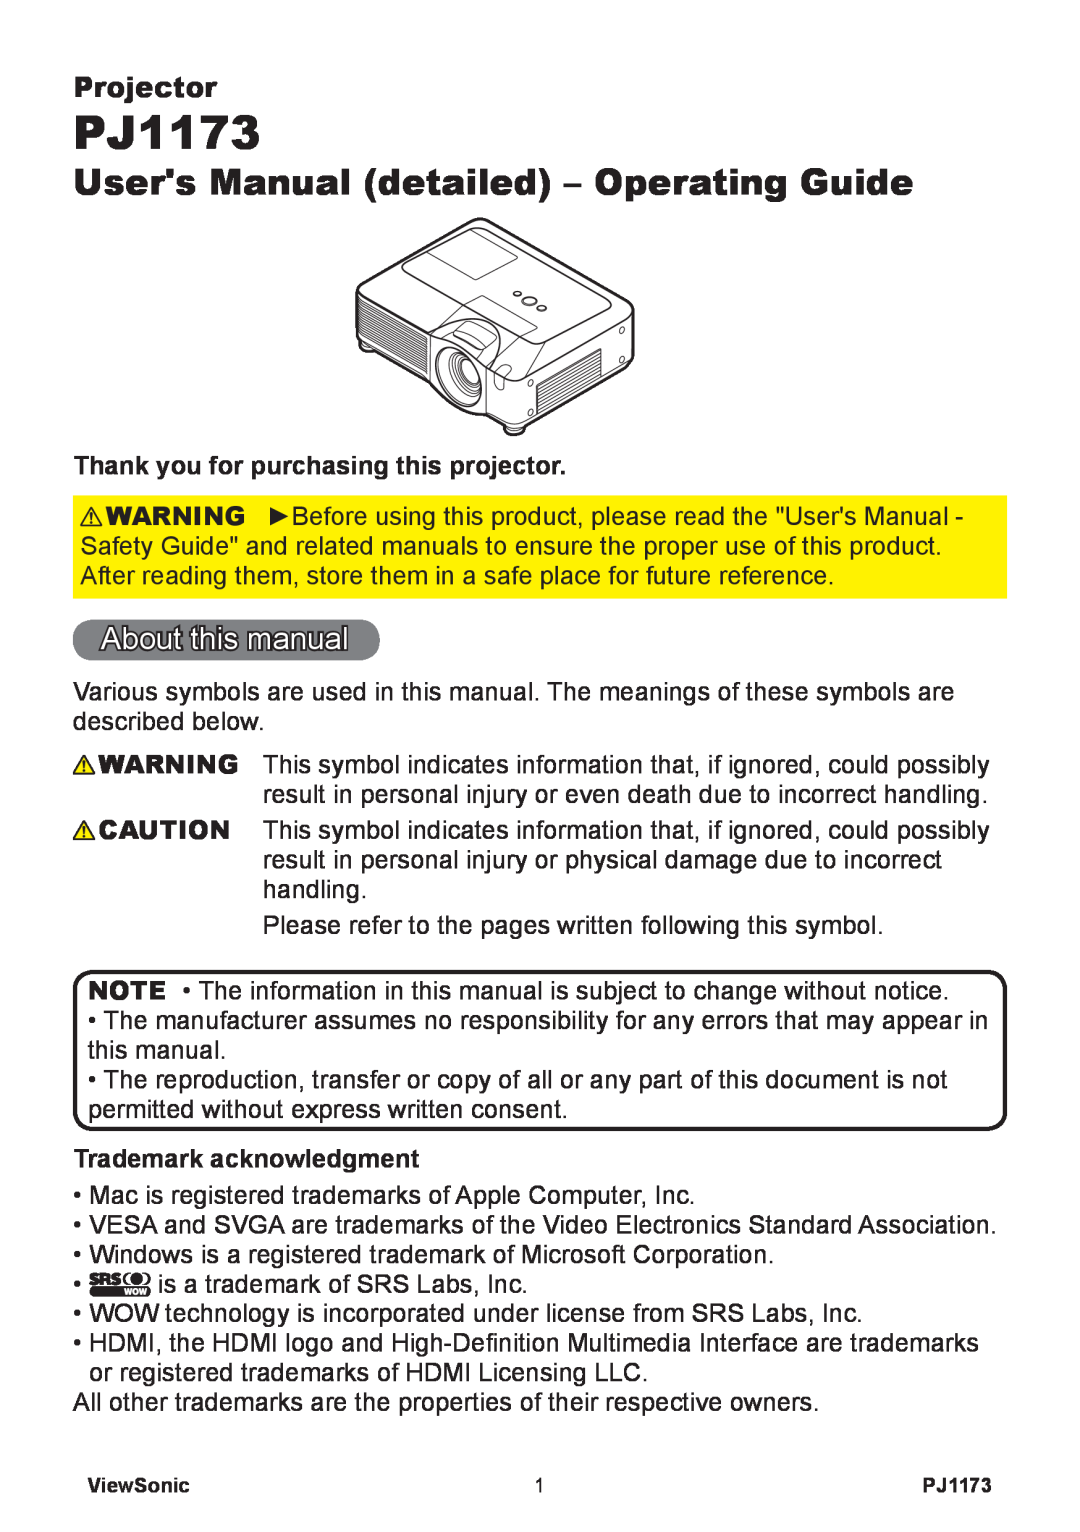 ViewSonic VS12109 PJ1173, Users Manual detailed – Operating Guide, About this manual, Projector, Trademark acknowledgment 